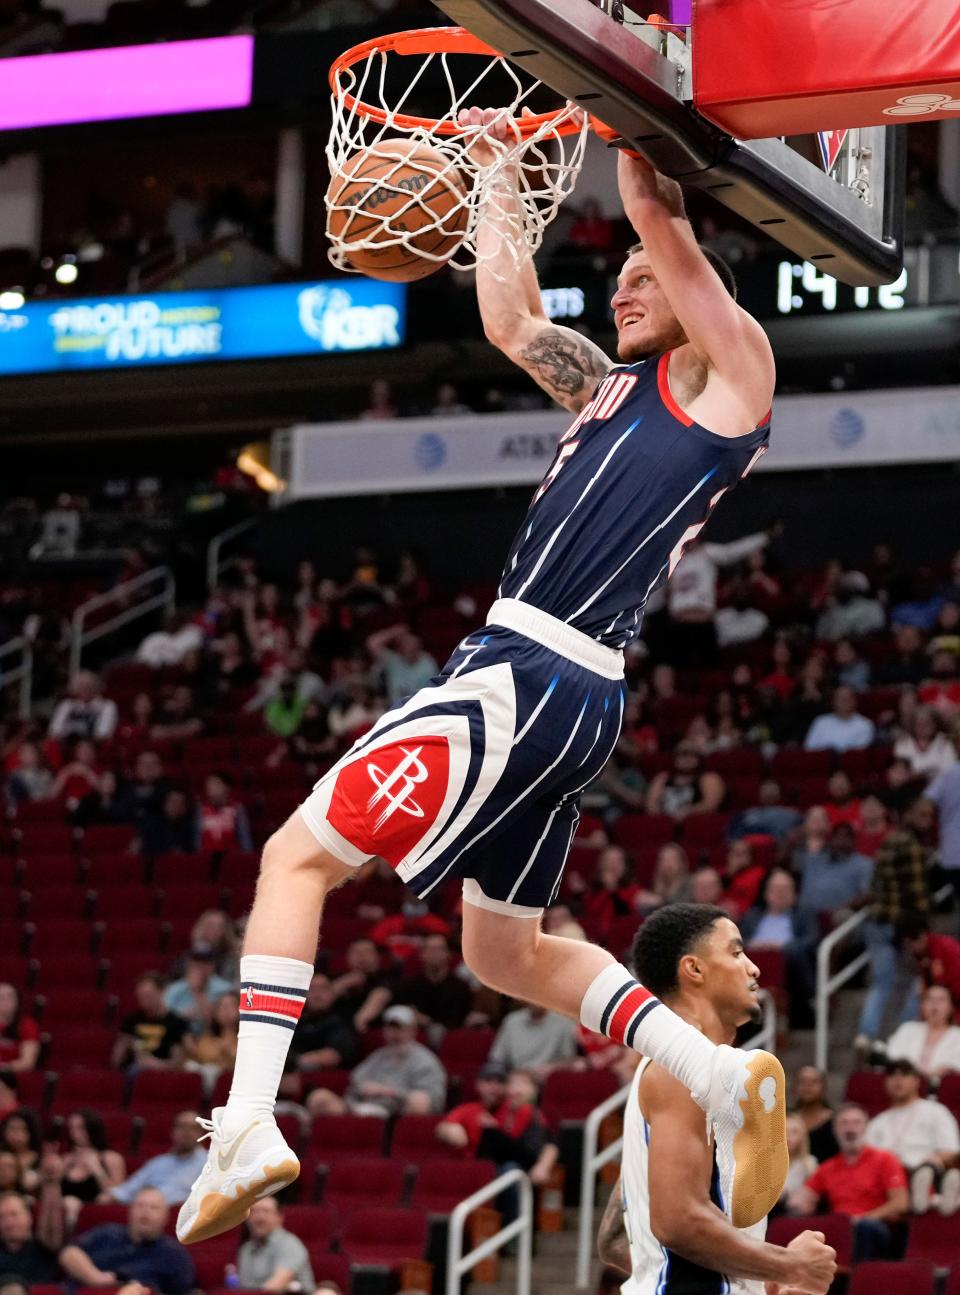 Houston Rockets guard Garrison Mathews dunks during the first half of the team's NBA basketball game against the Orlando Magic, Friday, Dec. 3, 2021, in Houston. (AP Photo/Eric Christian Smith)